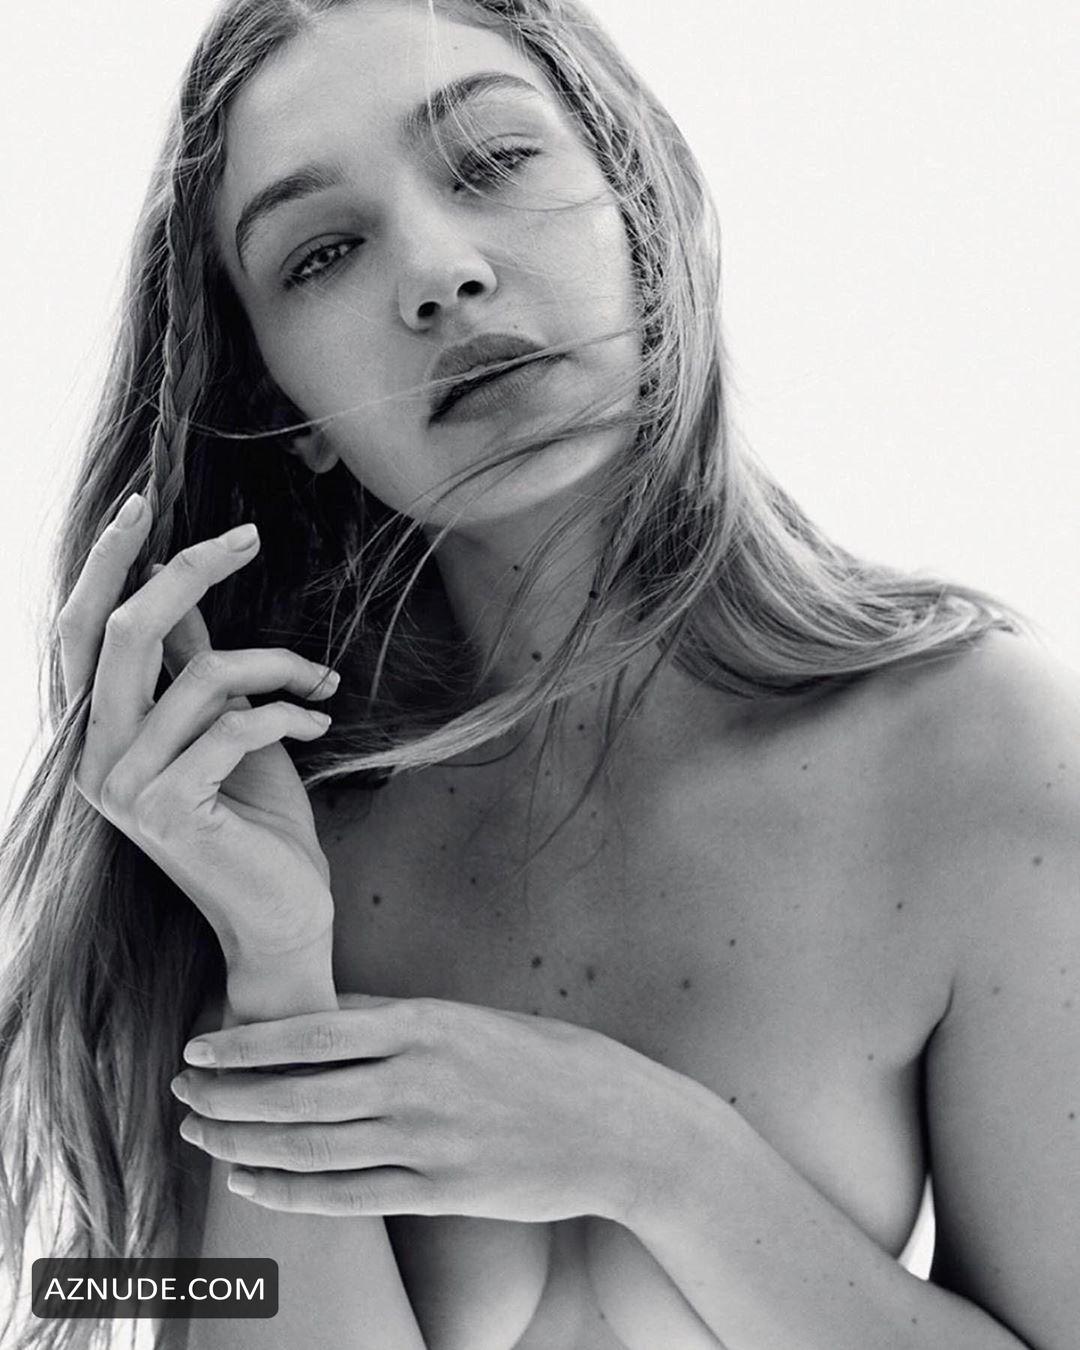 Gigi Hadid Appeared Naked In The Russian Edition Of Vogue Magazine February 2020 Issue Aznude 8694